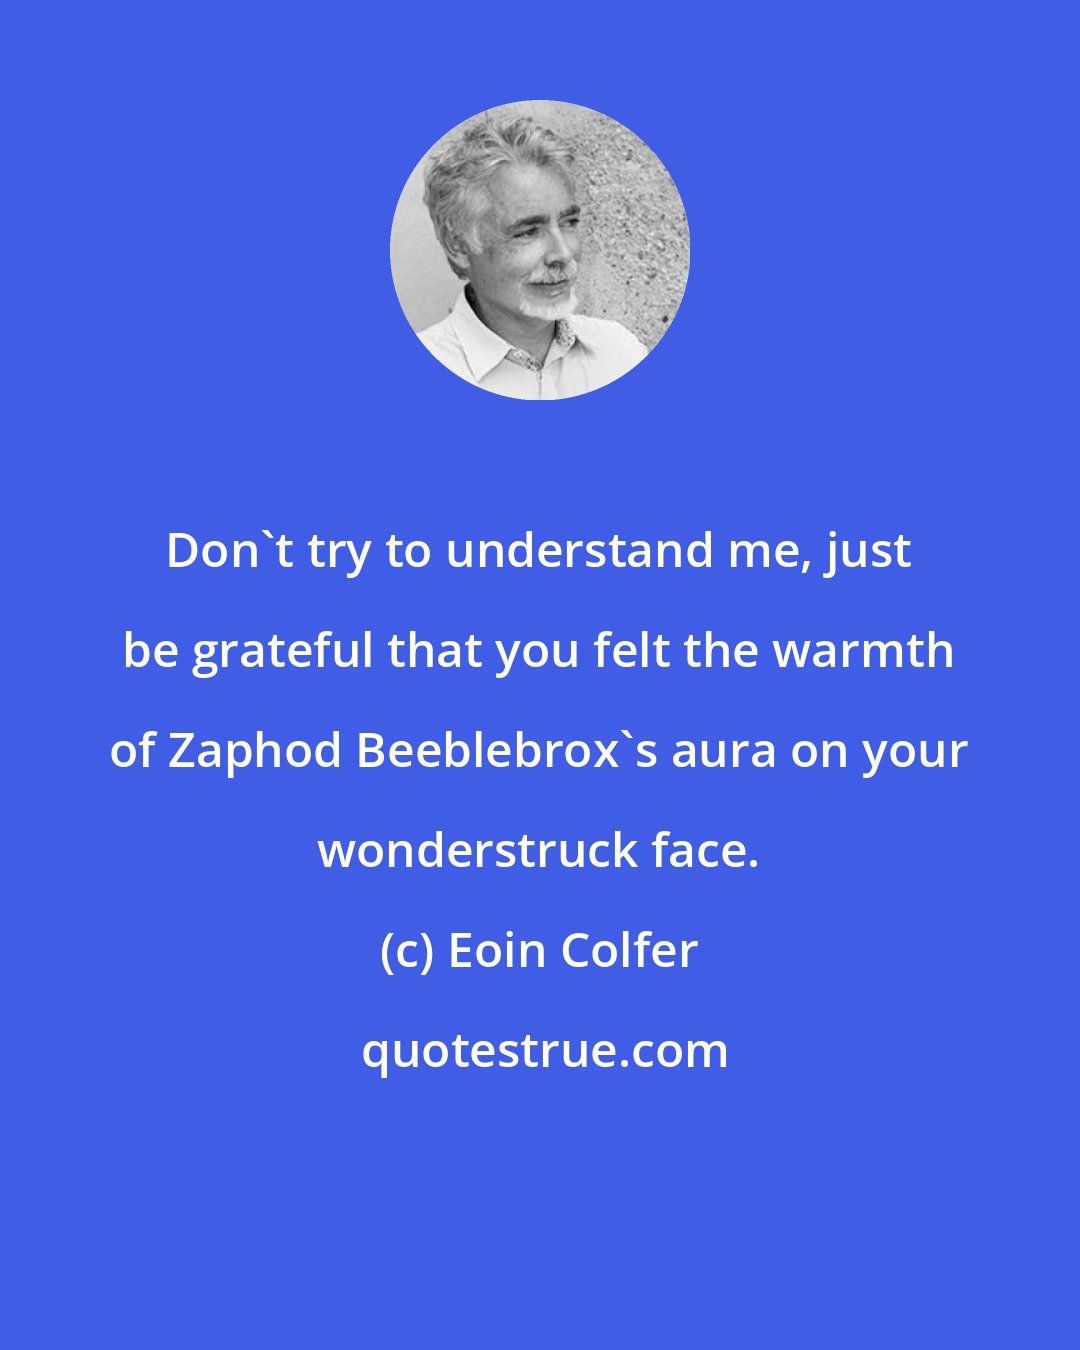 Eoin Colfer: Don't try to understand me, just be grateful that you felt the warmth of Zaphod Beeblebrox's aura on your wonderstruck face.